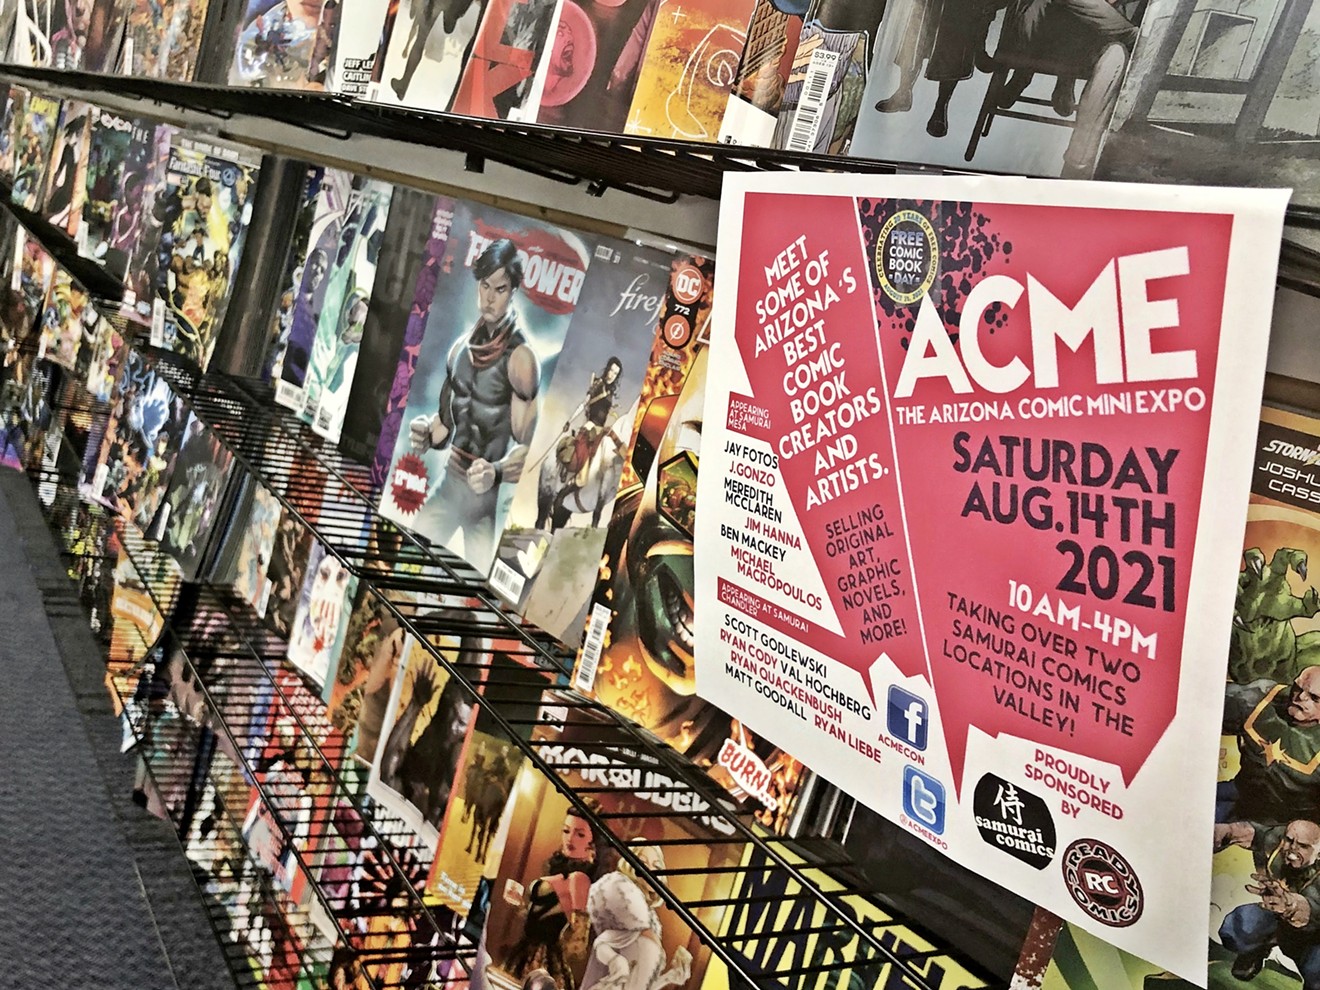 Samurai Comics locations in Chandler and Mesa are gearing up for the Arizona Comic Mini Expo.